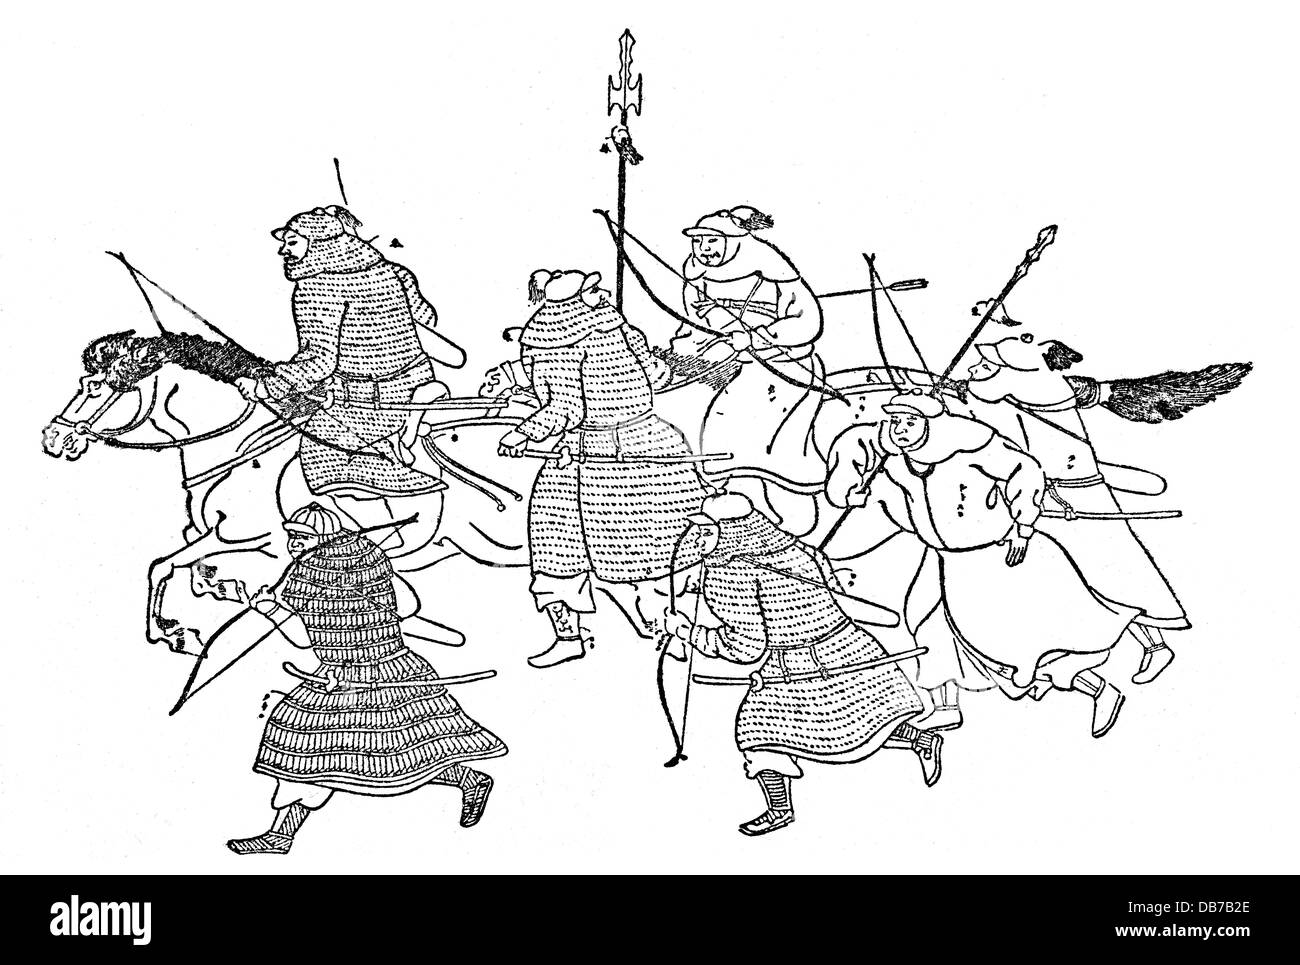 Mongol Invasions in Japan 1274 - 1281, attacking Mongolian warriors, drawing, after 'Moko Shurai Ekotoba',between 1275 and 1293, Additional-Rights-Clearences-Not Available Stock Photo